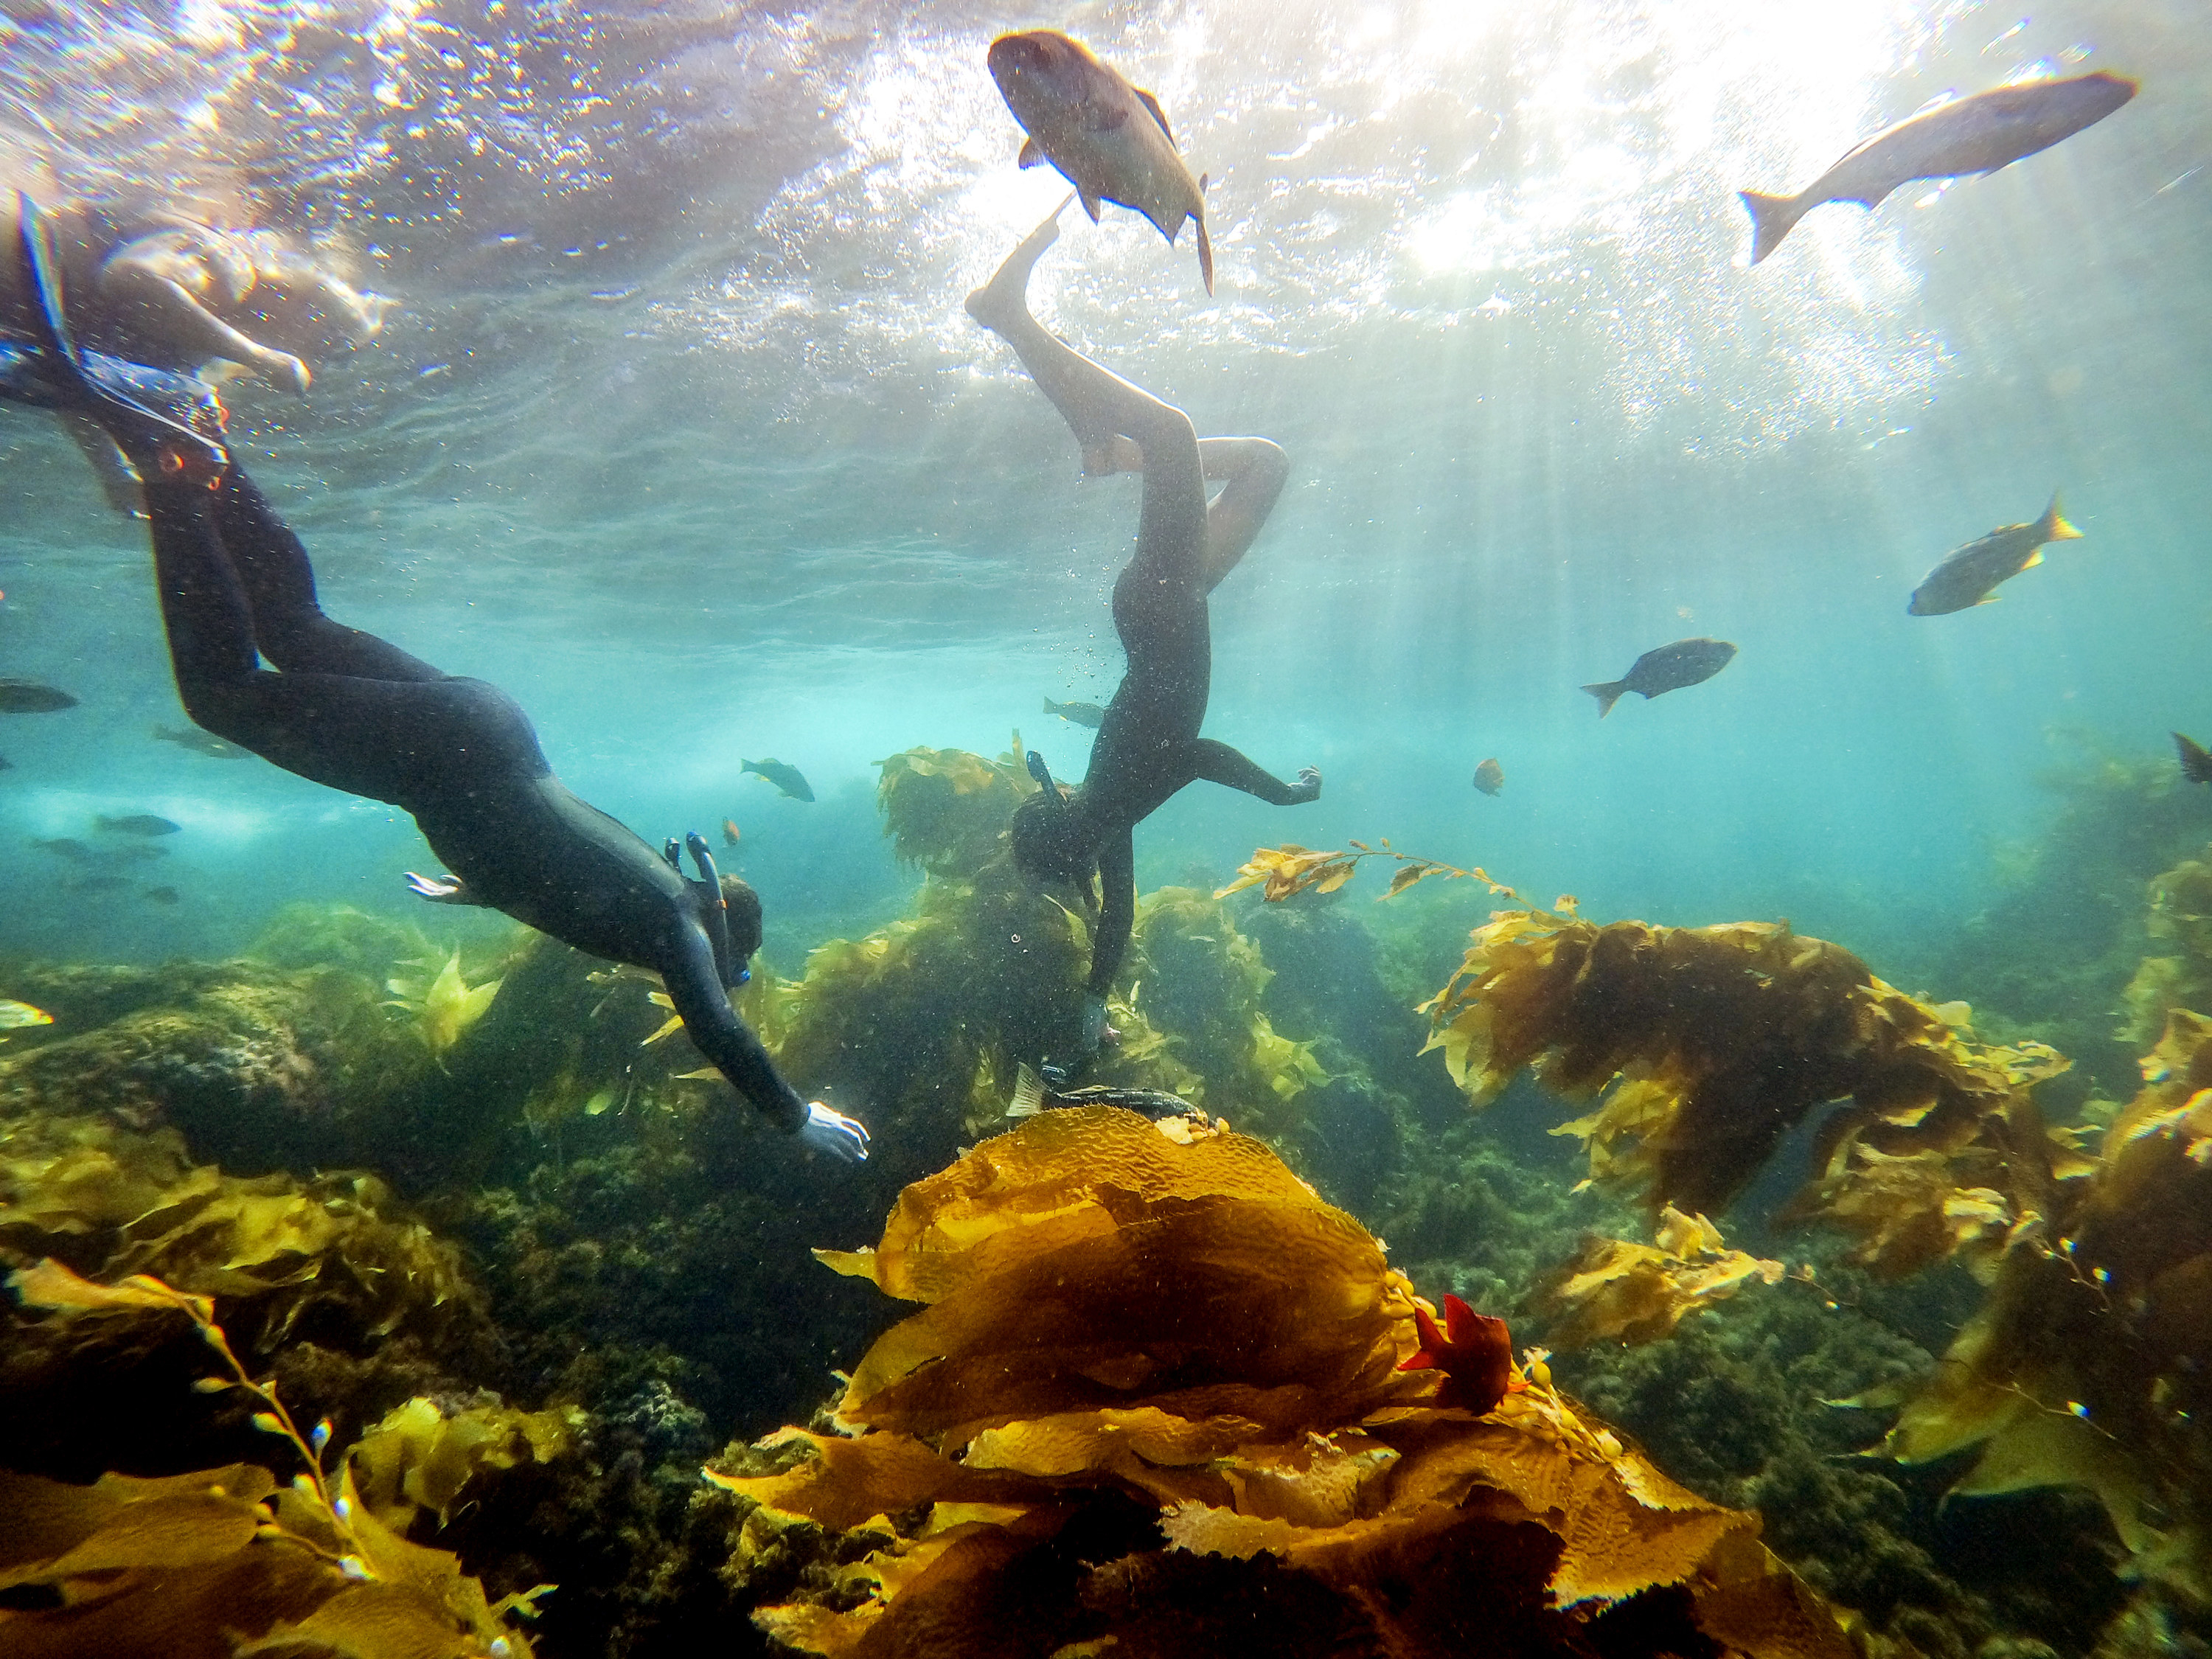 Snorkelers and fish swim in the water